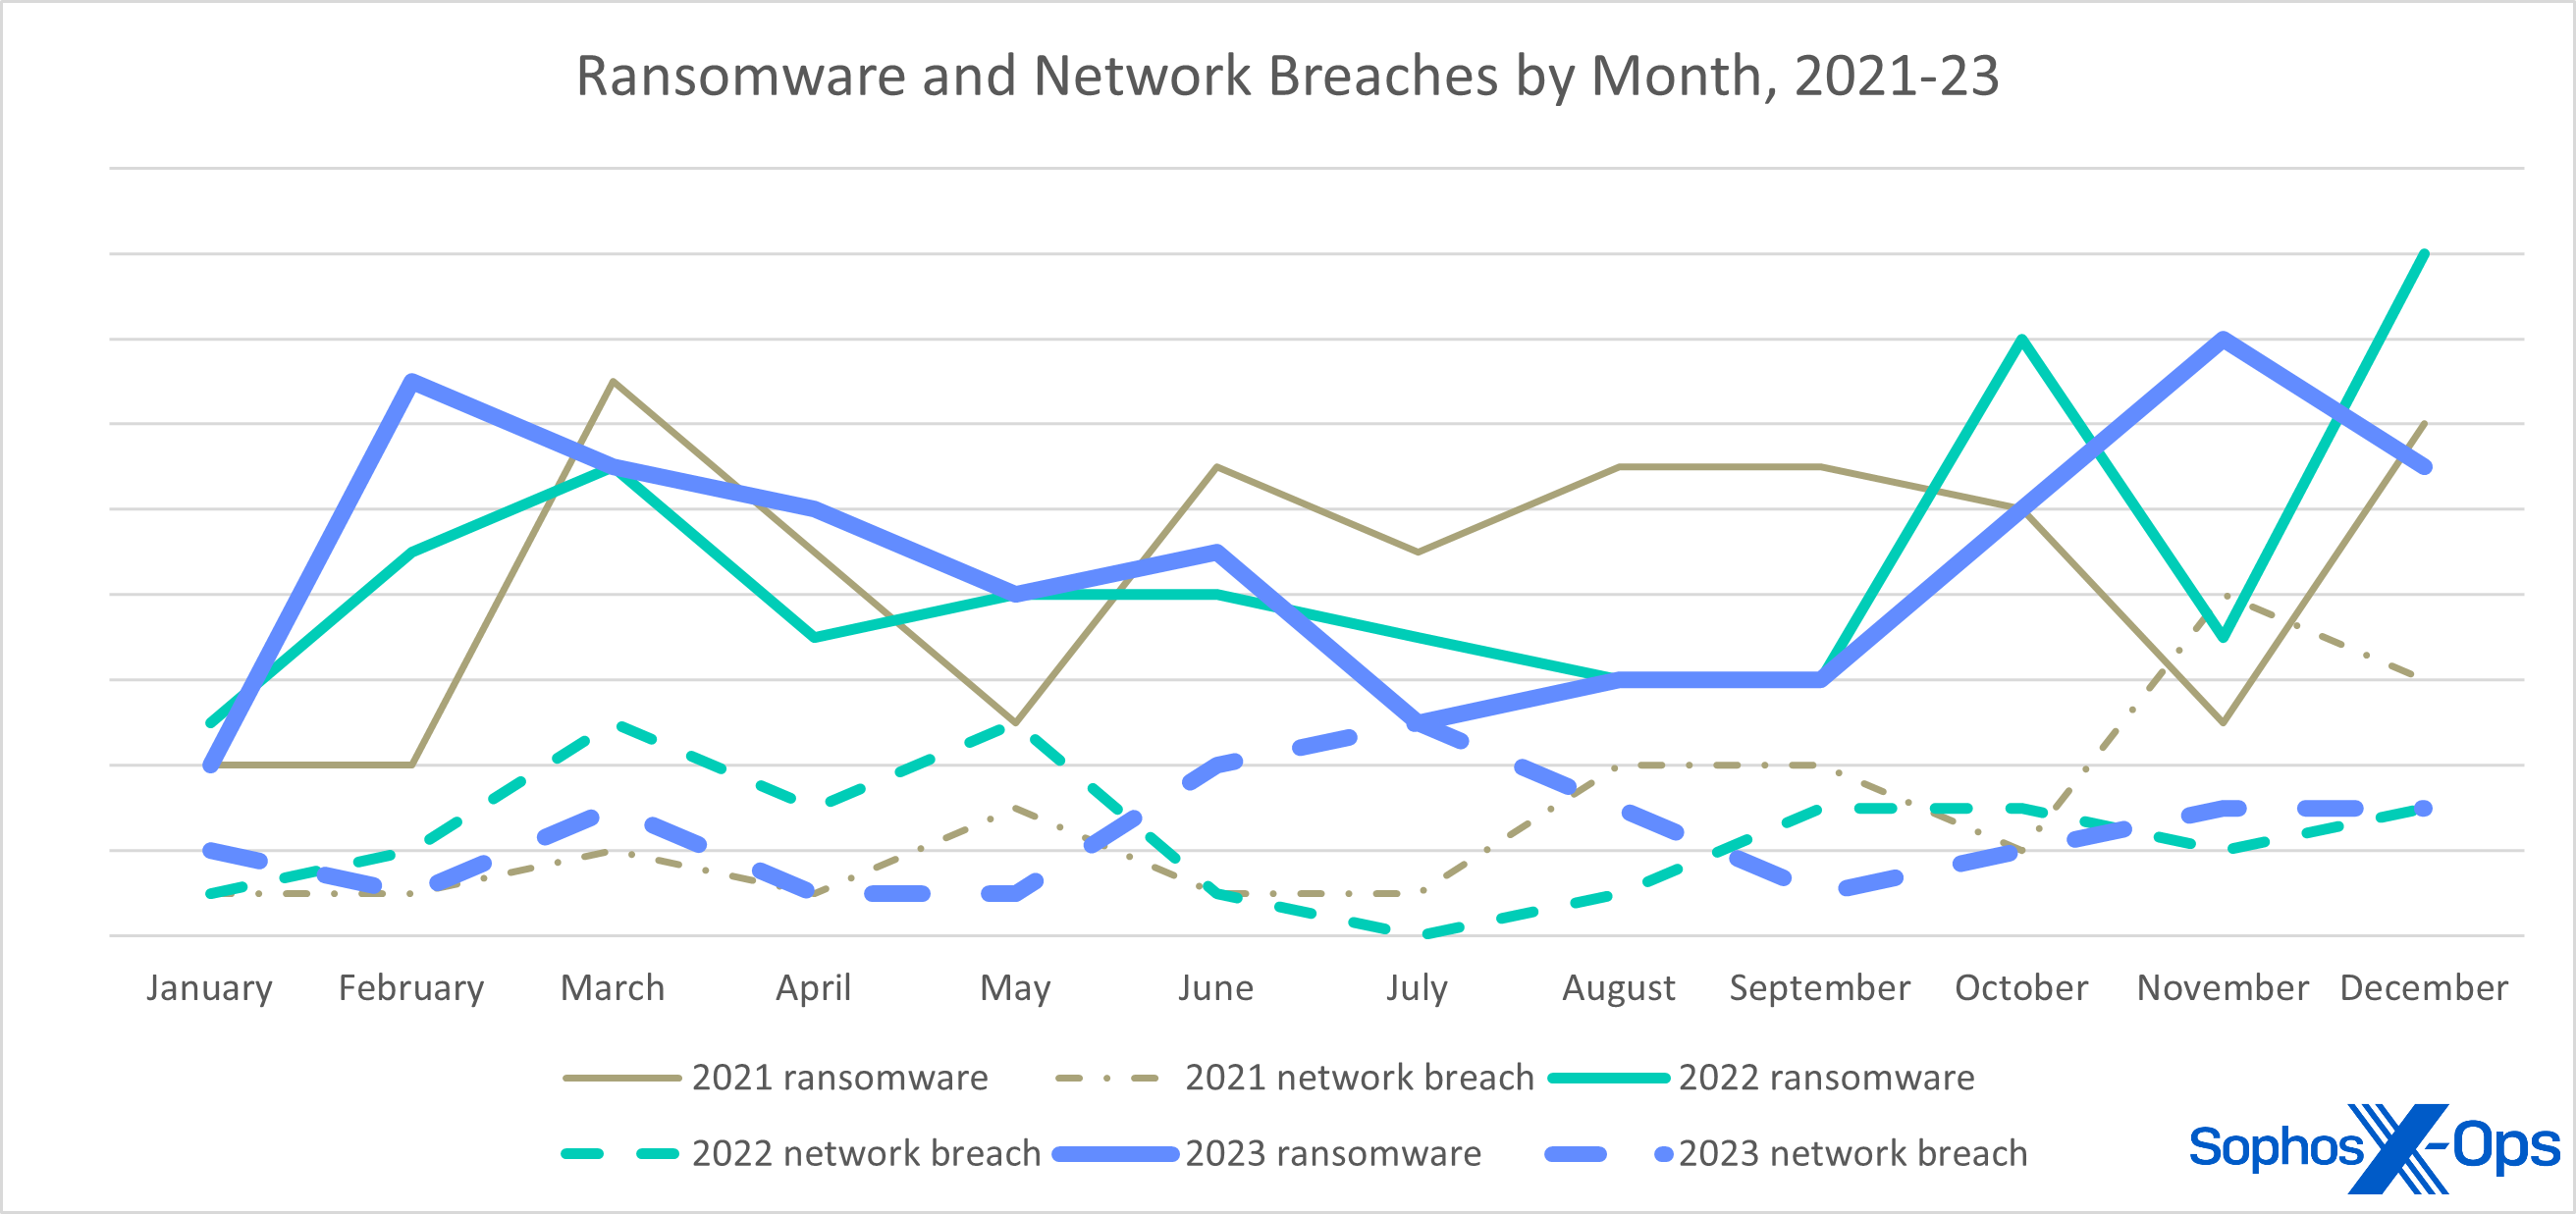 A line chart with six lines showing trends in ransomware and network breaches by month 2021-23